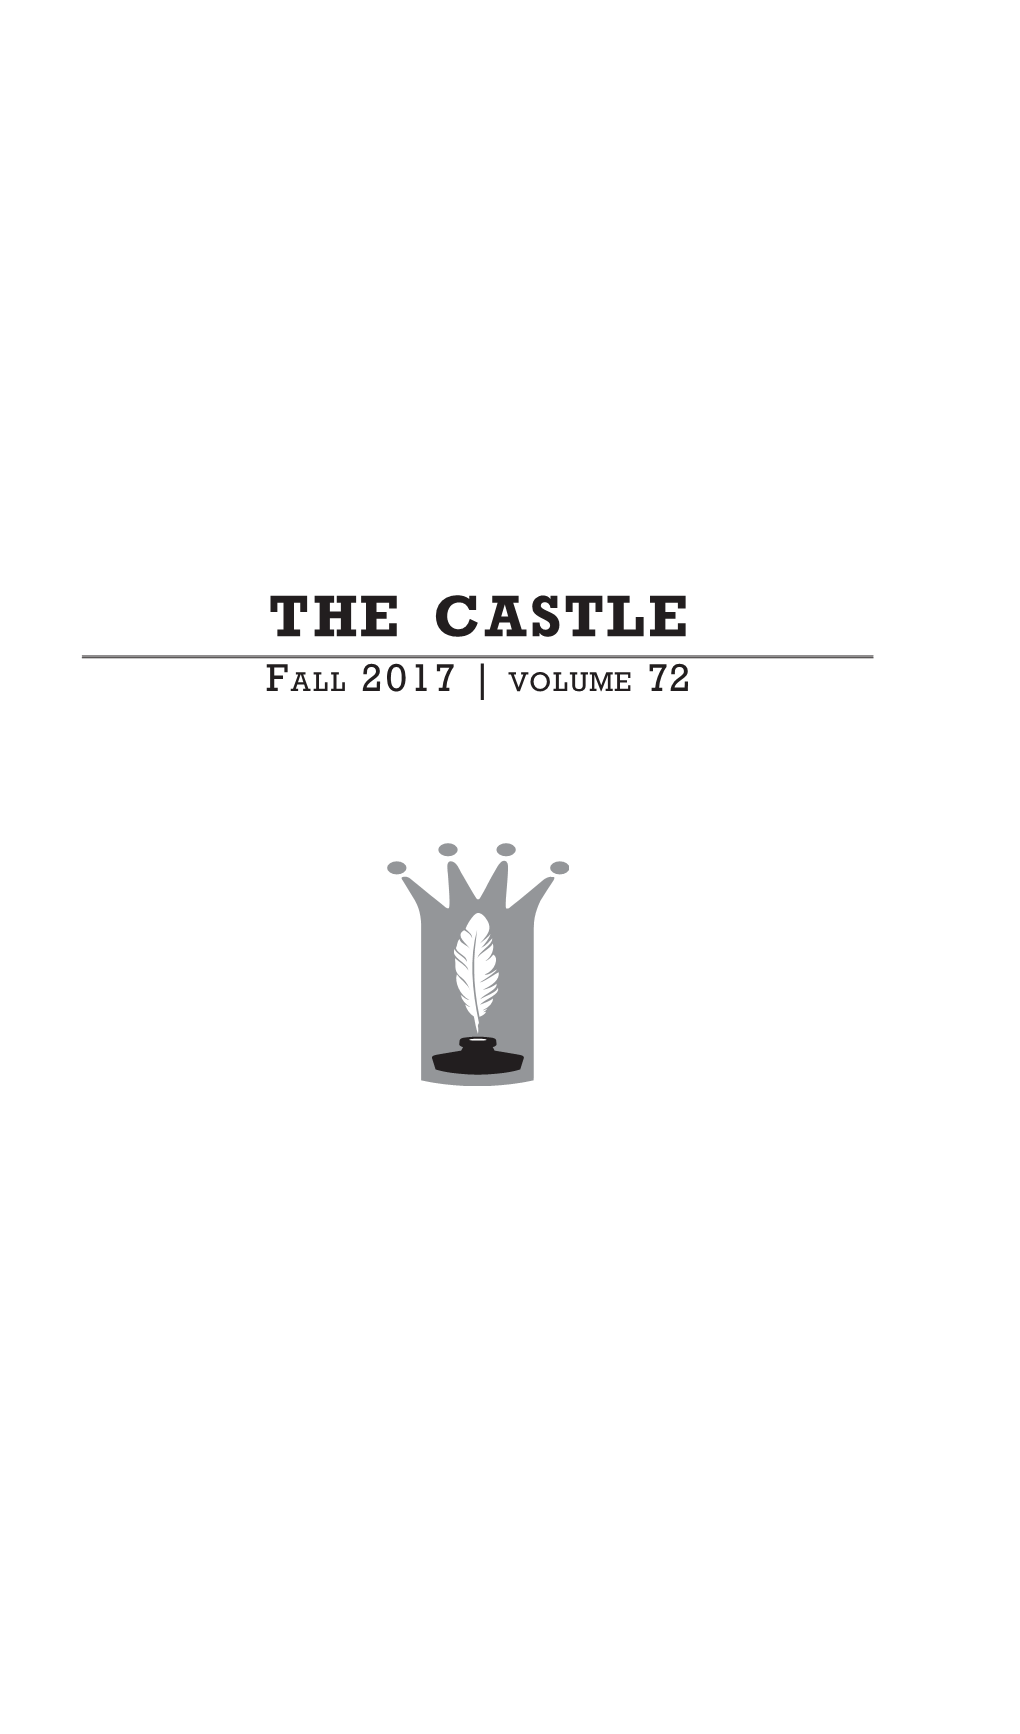 The Castle Fall 2017 | Volume 72